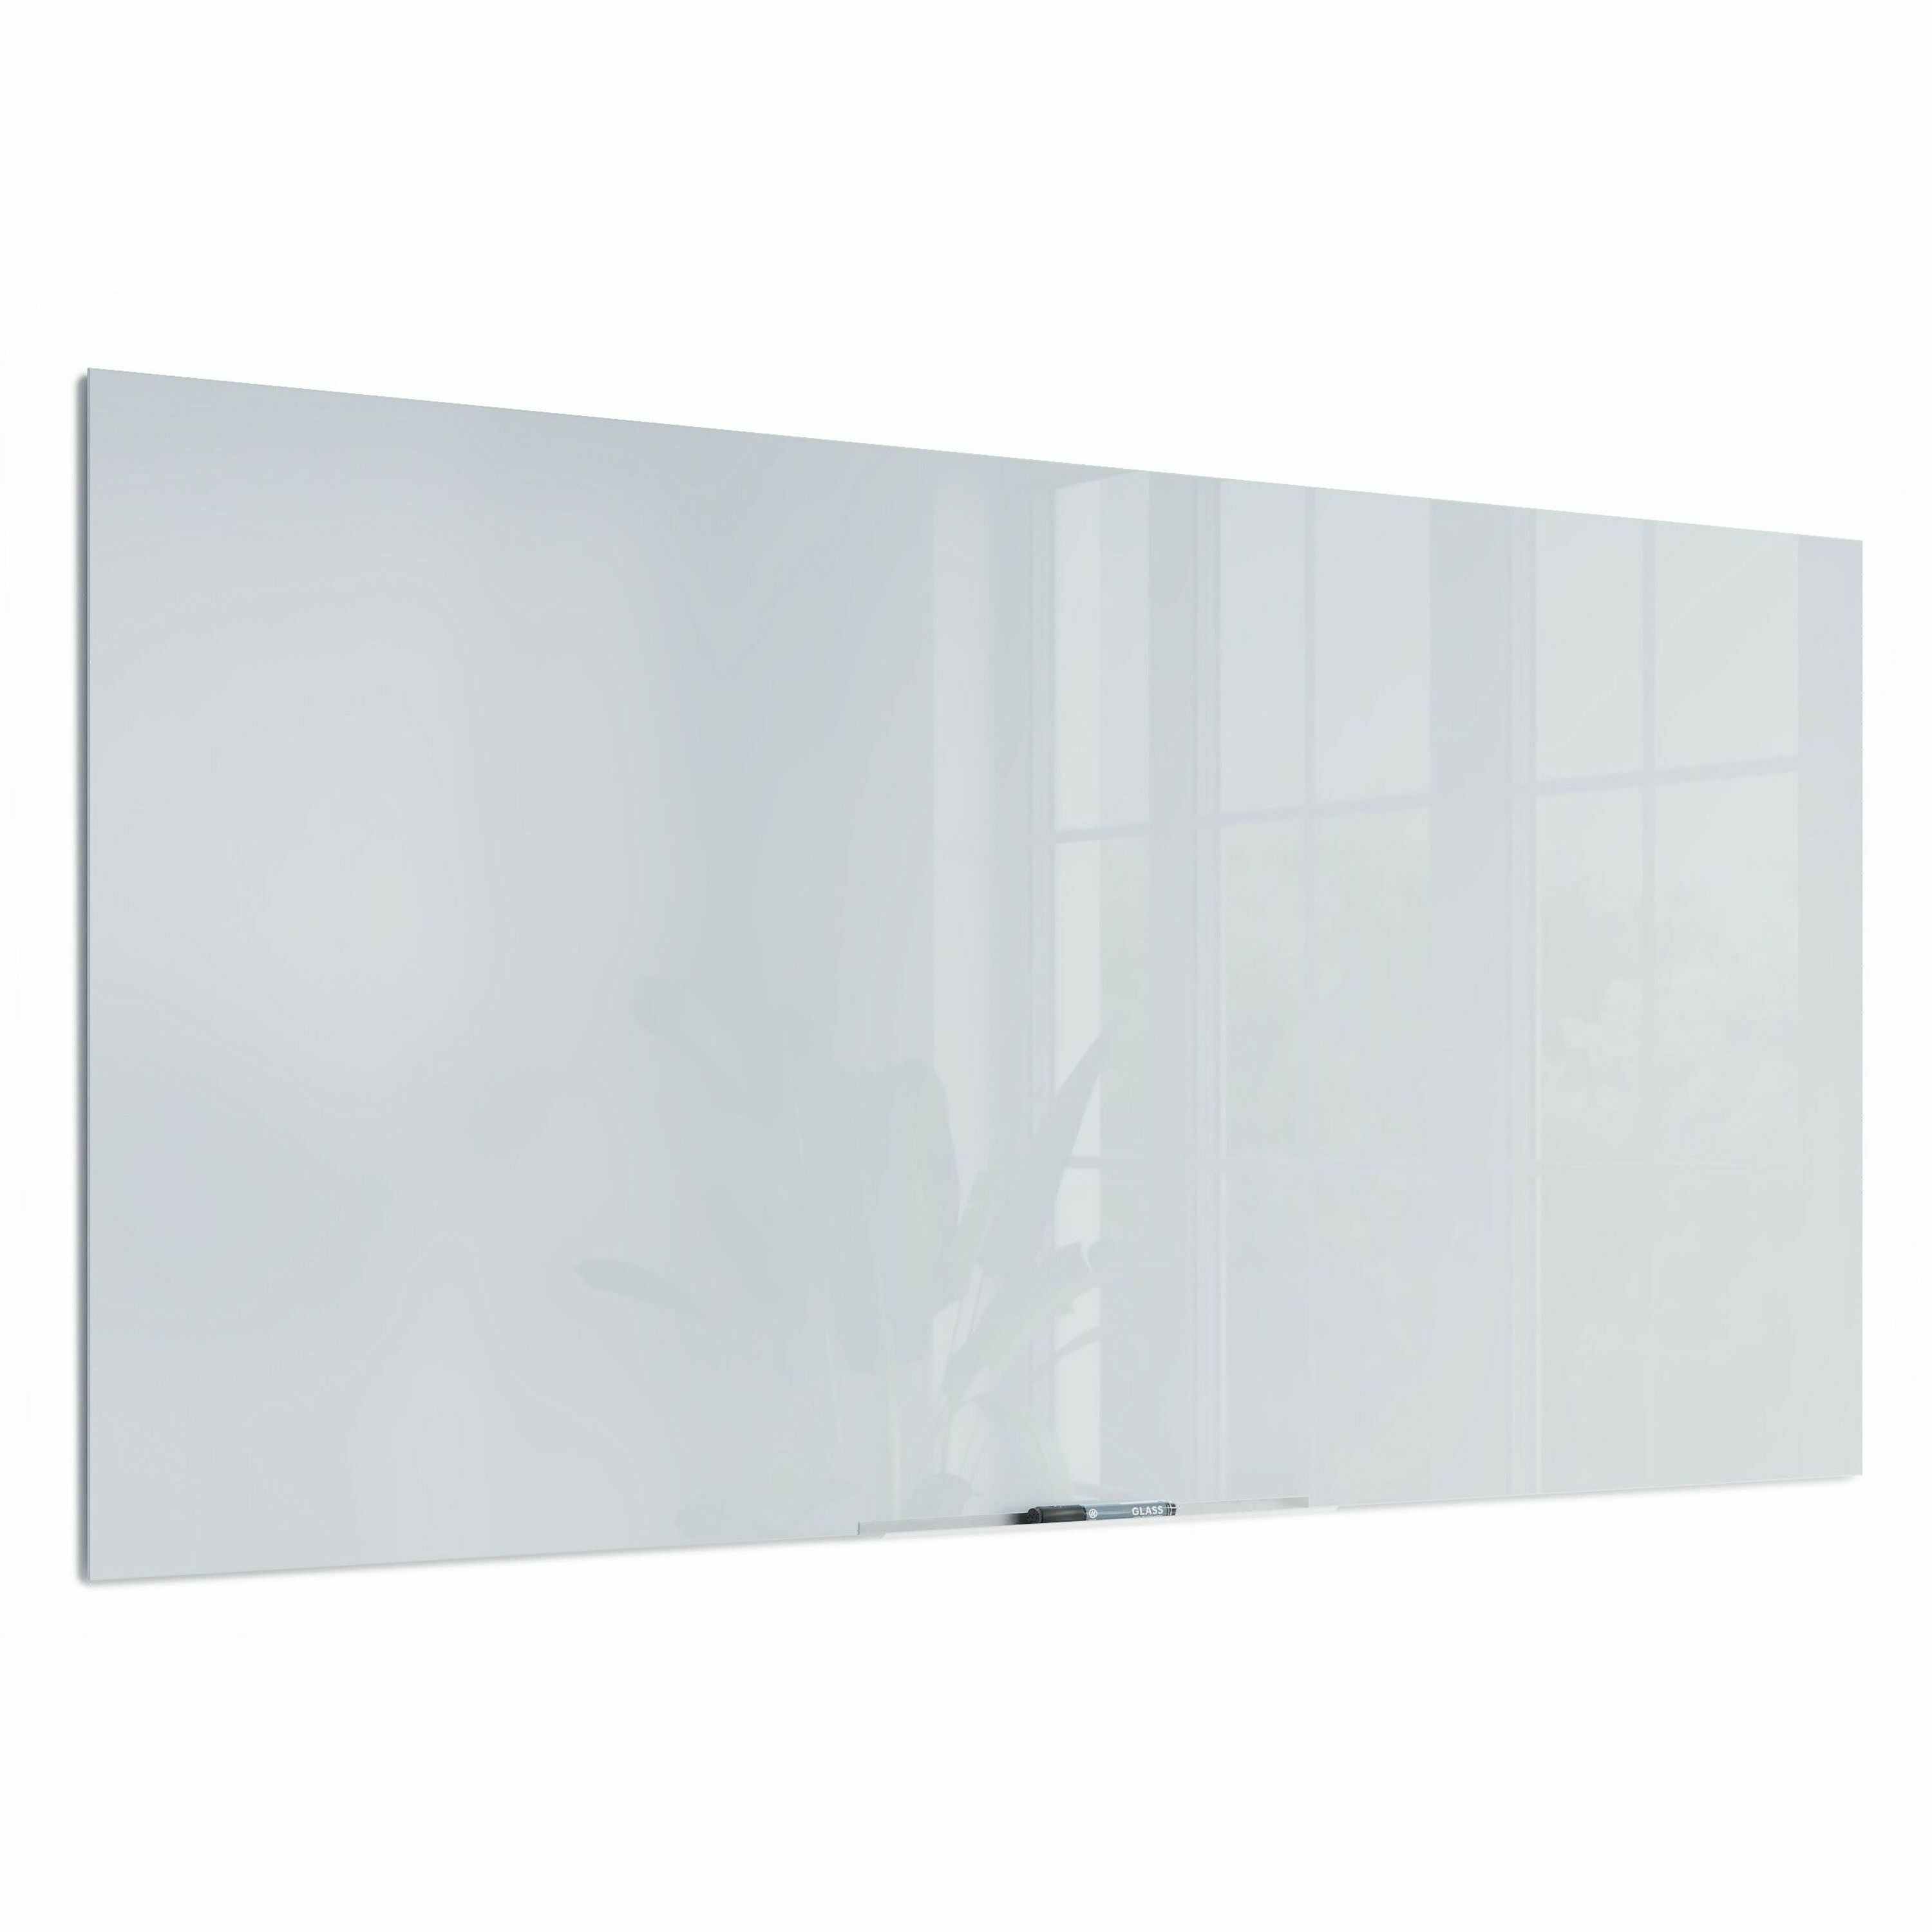 u-brands-floating-glass-dry-erase-board-35-29-ft-width-x-70-58-ft-height-frosted-white-tempered-glass-surface-rectangle-horizontal-vertical-1-each_ubr2779u0001 - 2